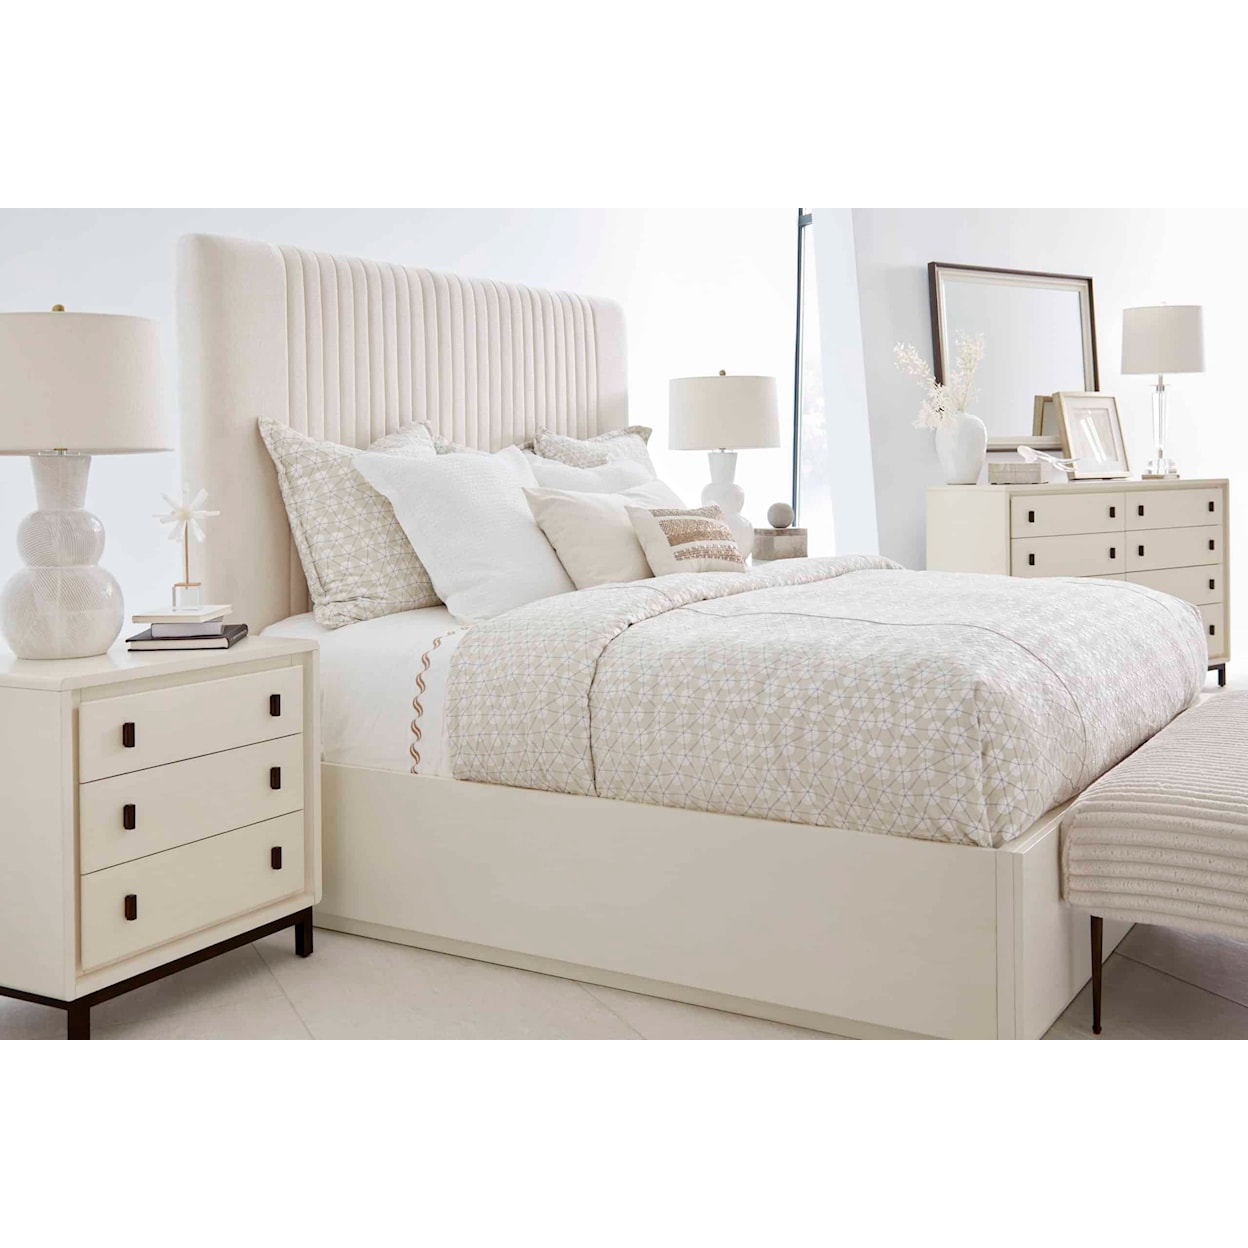 A.R.T. Furniture Inc Blanc 3-Drawer Bedside Chest